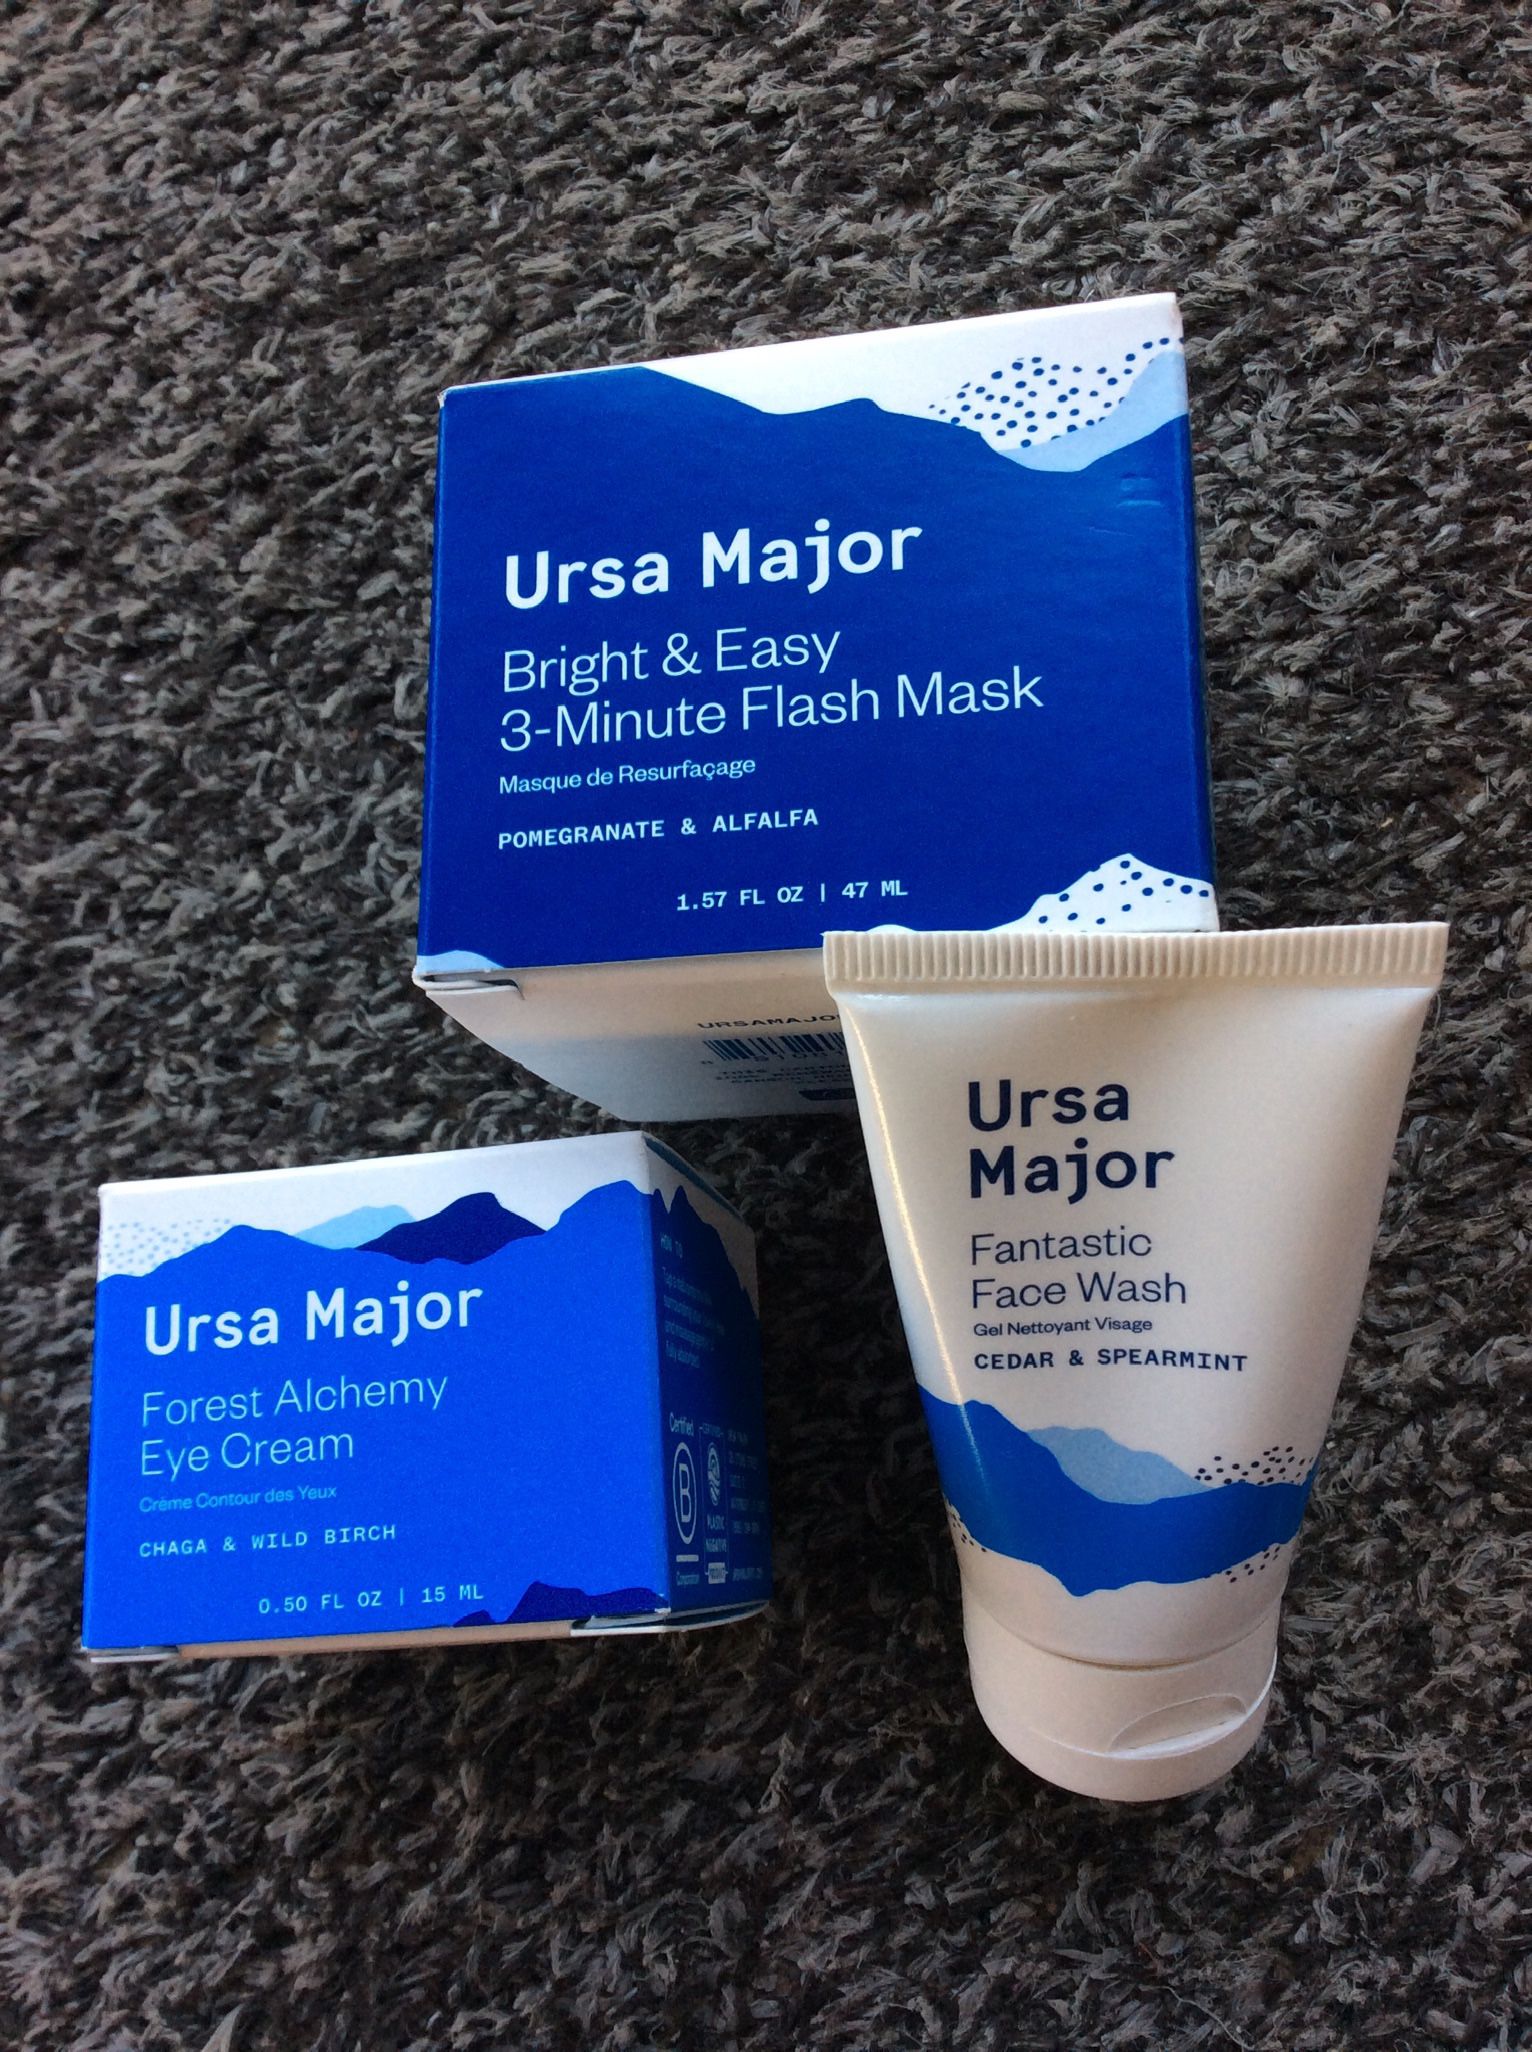 All Ursa Major Products Shown Mask Eye & Cleanser